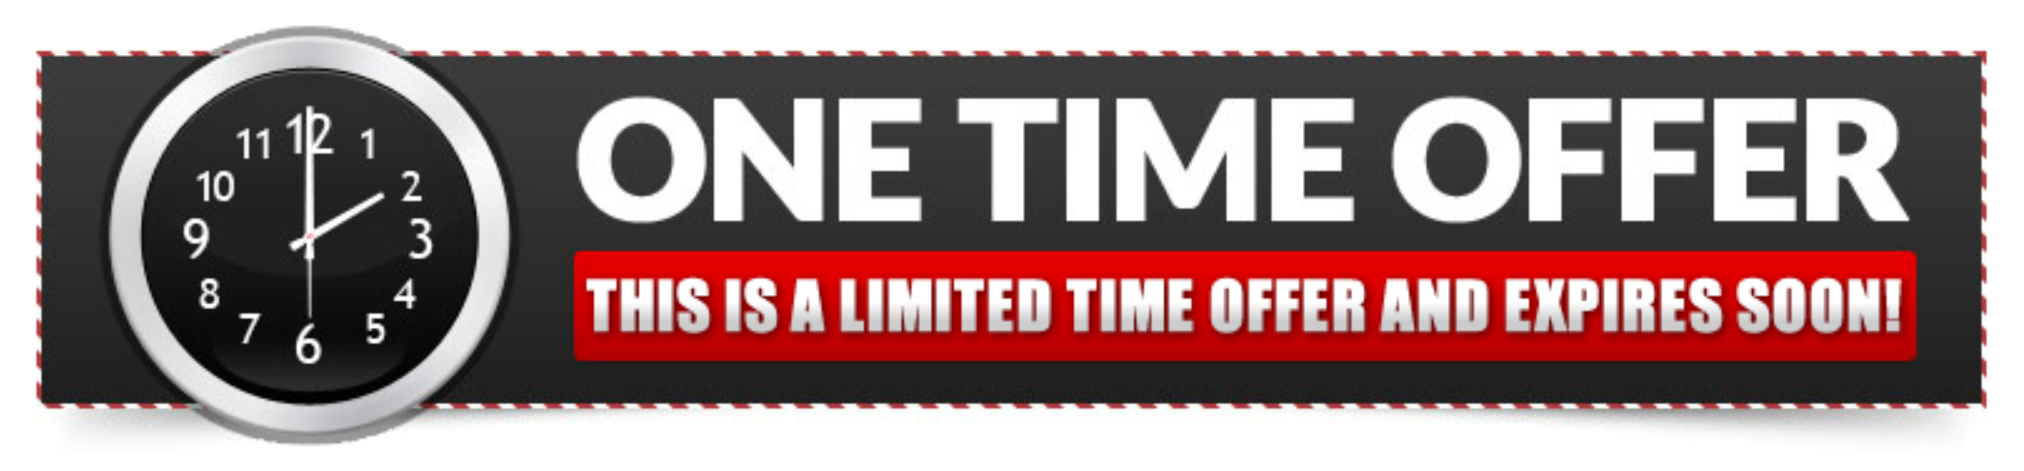 Limit offer. Limited time offer. Time limit offer иконка. One time offer. Limited время.